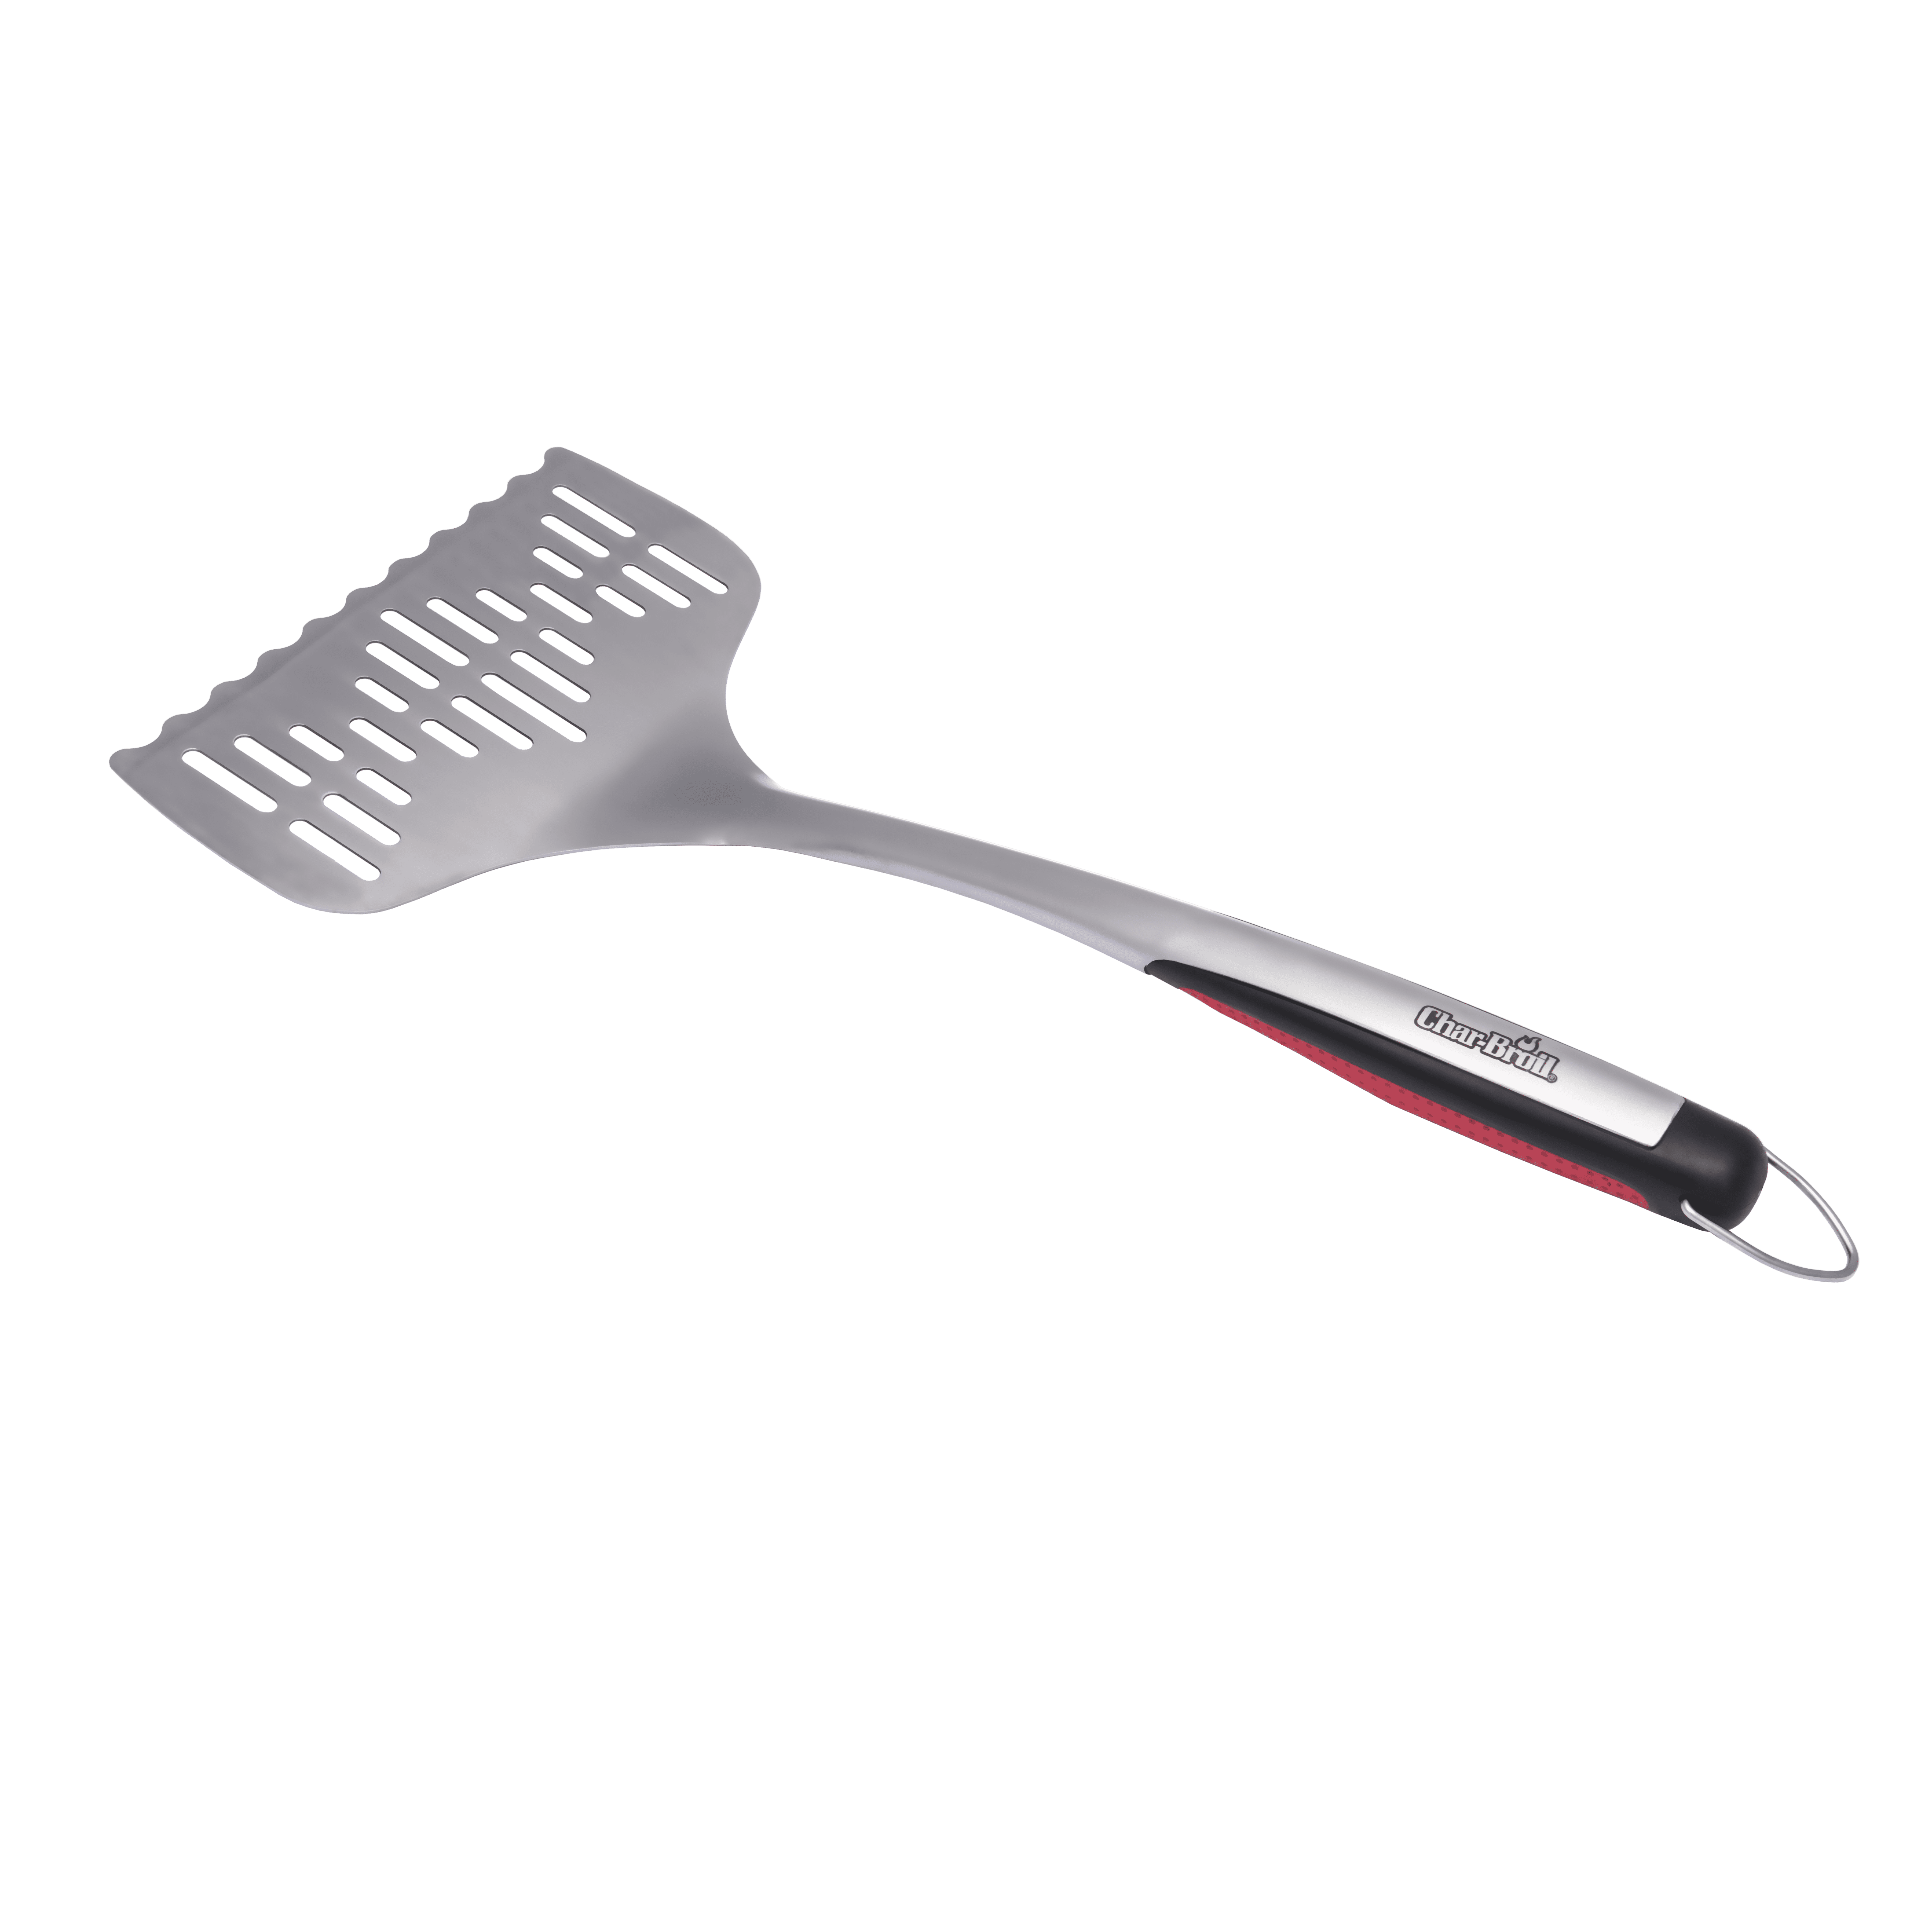 Char-Broil Comfort Grip Grilling Spatula, Stainless Steel, Red